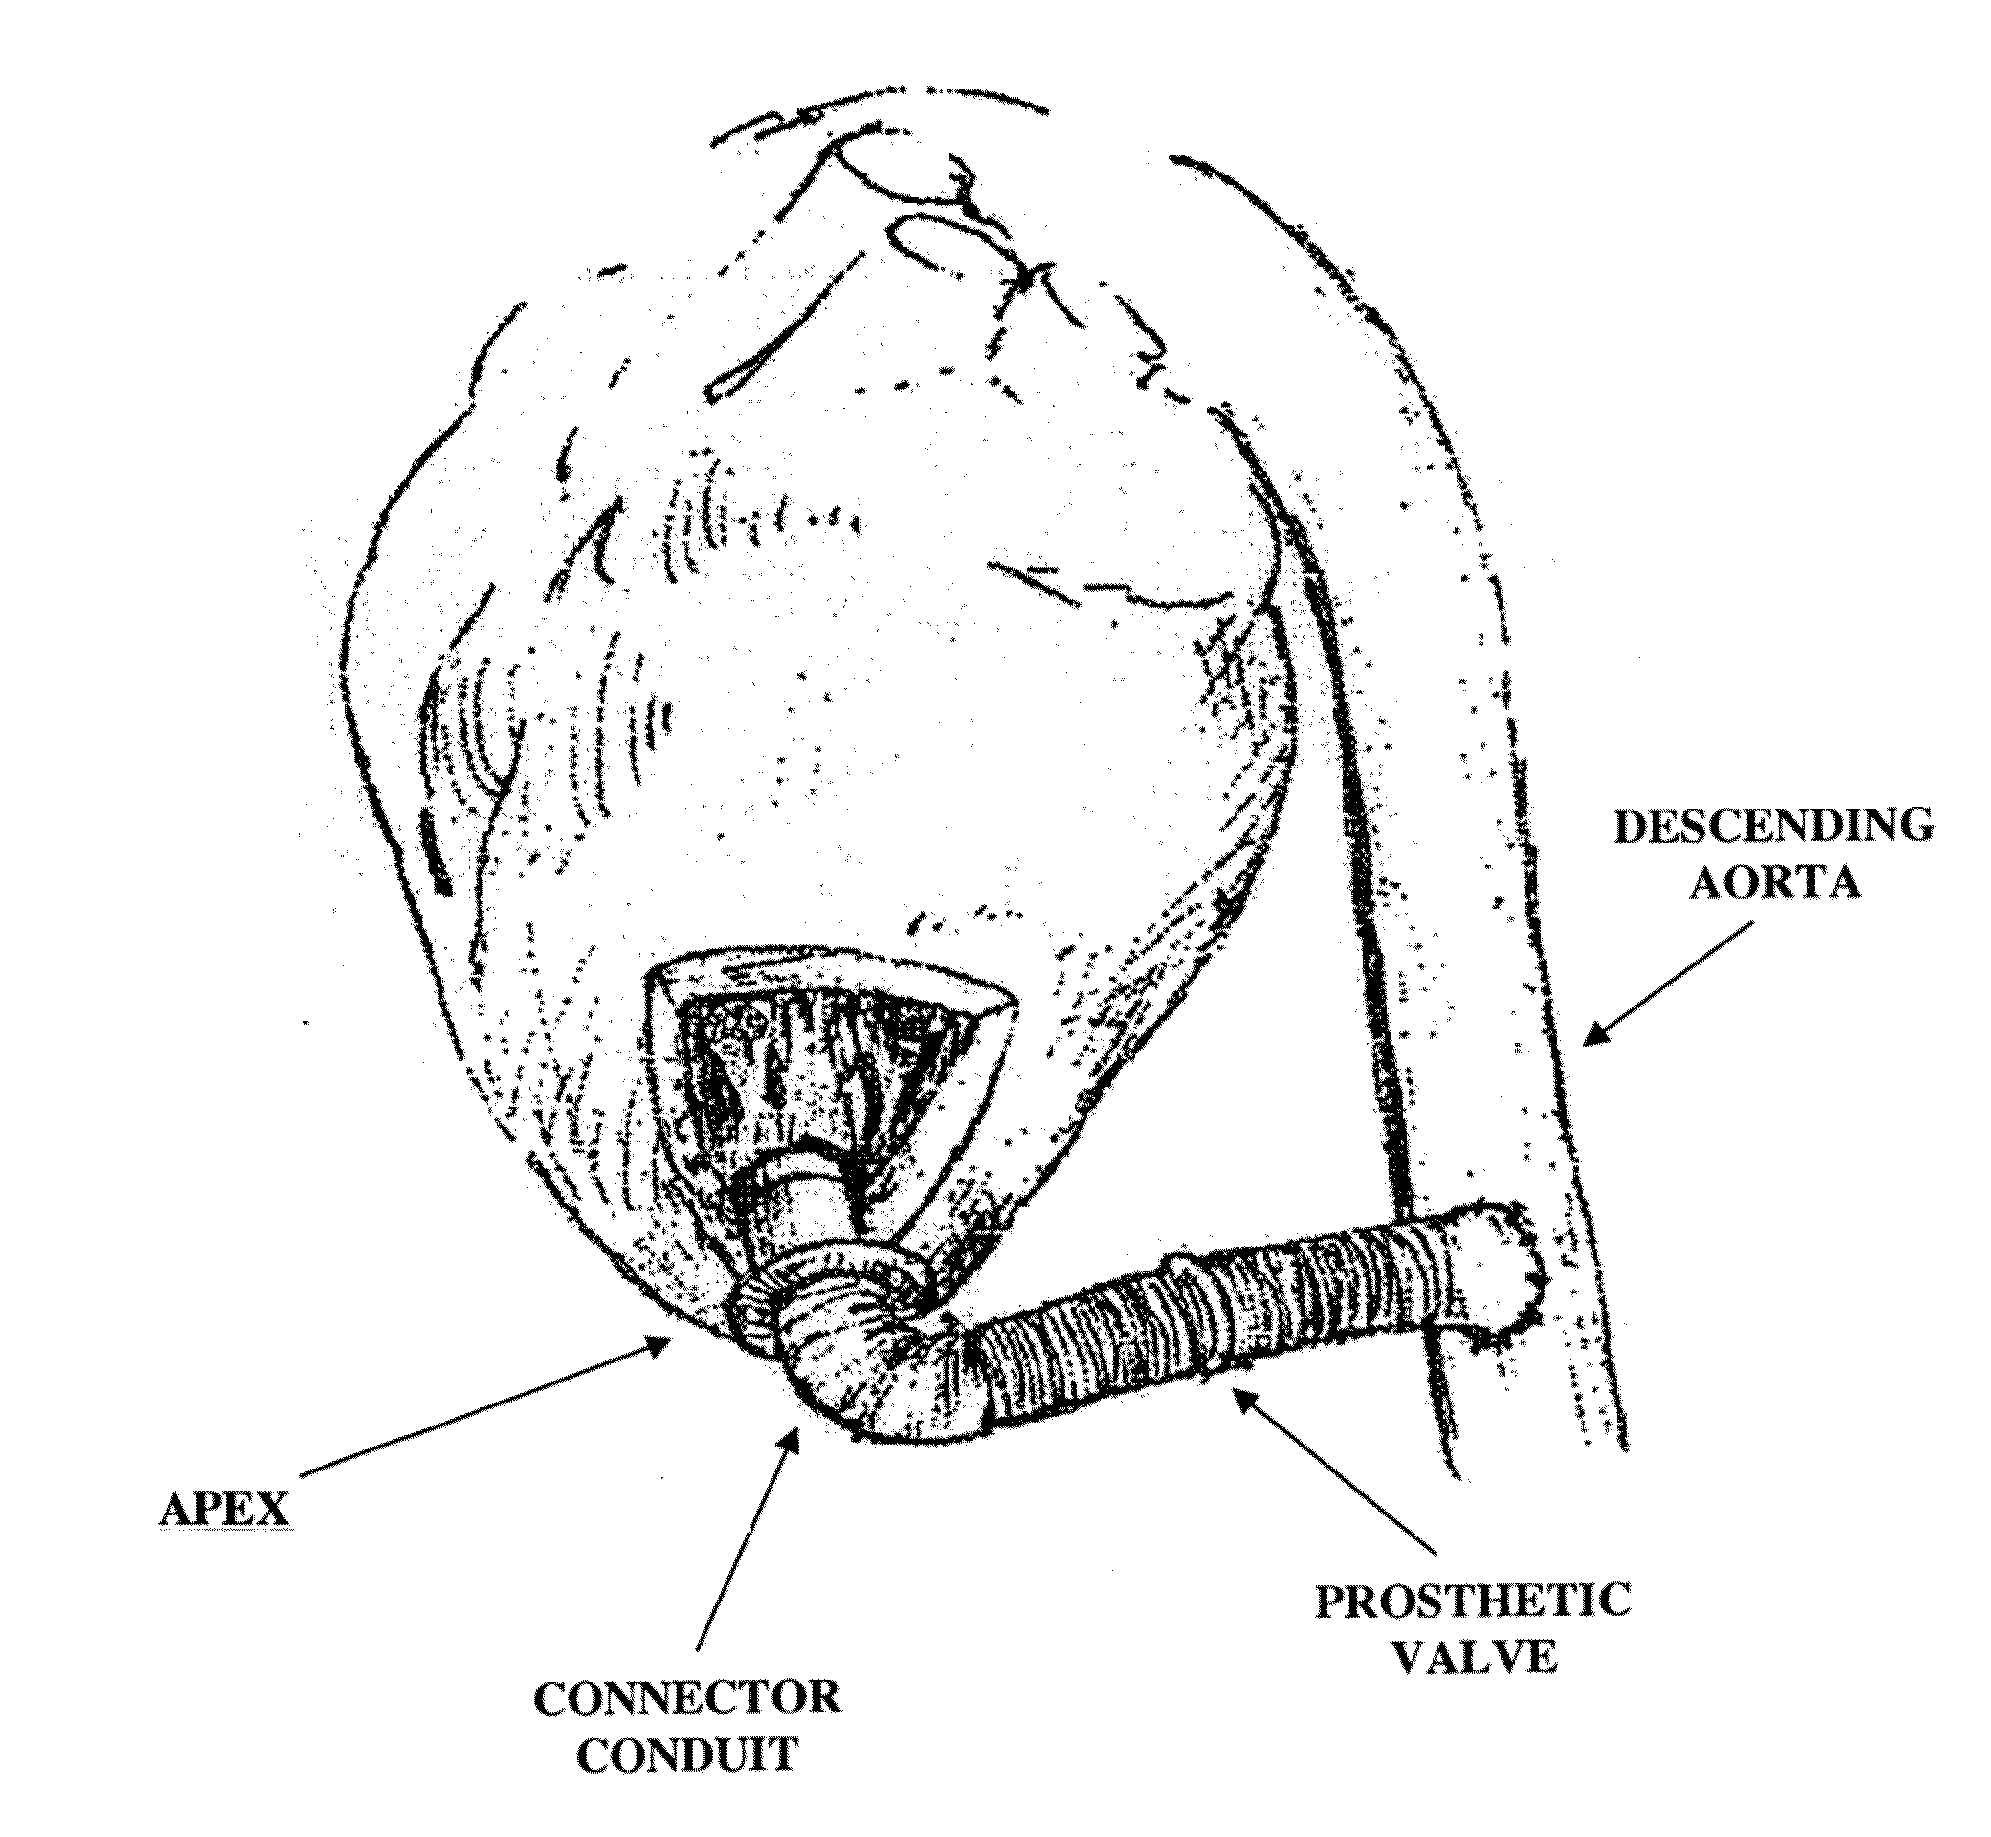 Apparatus and method for forming a hole in a hollow organ, connecting a conduit to the hollow organ and connecting a left ventricular assist device (LVAD) to the hollow organ